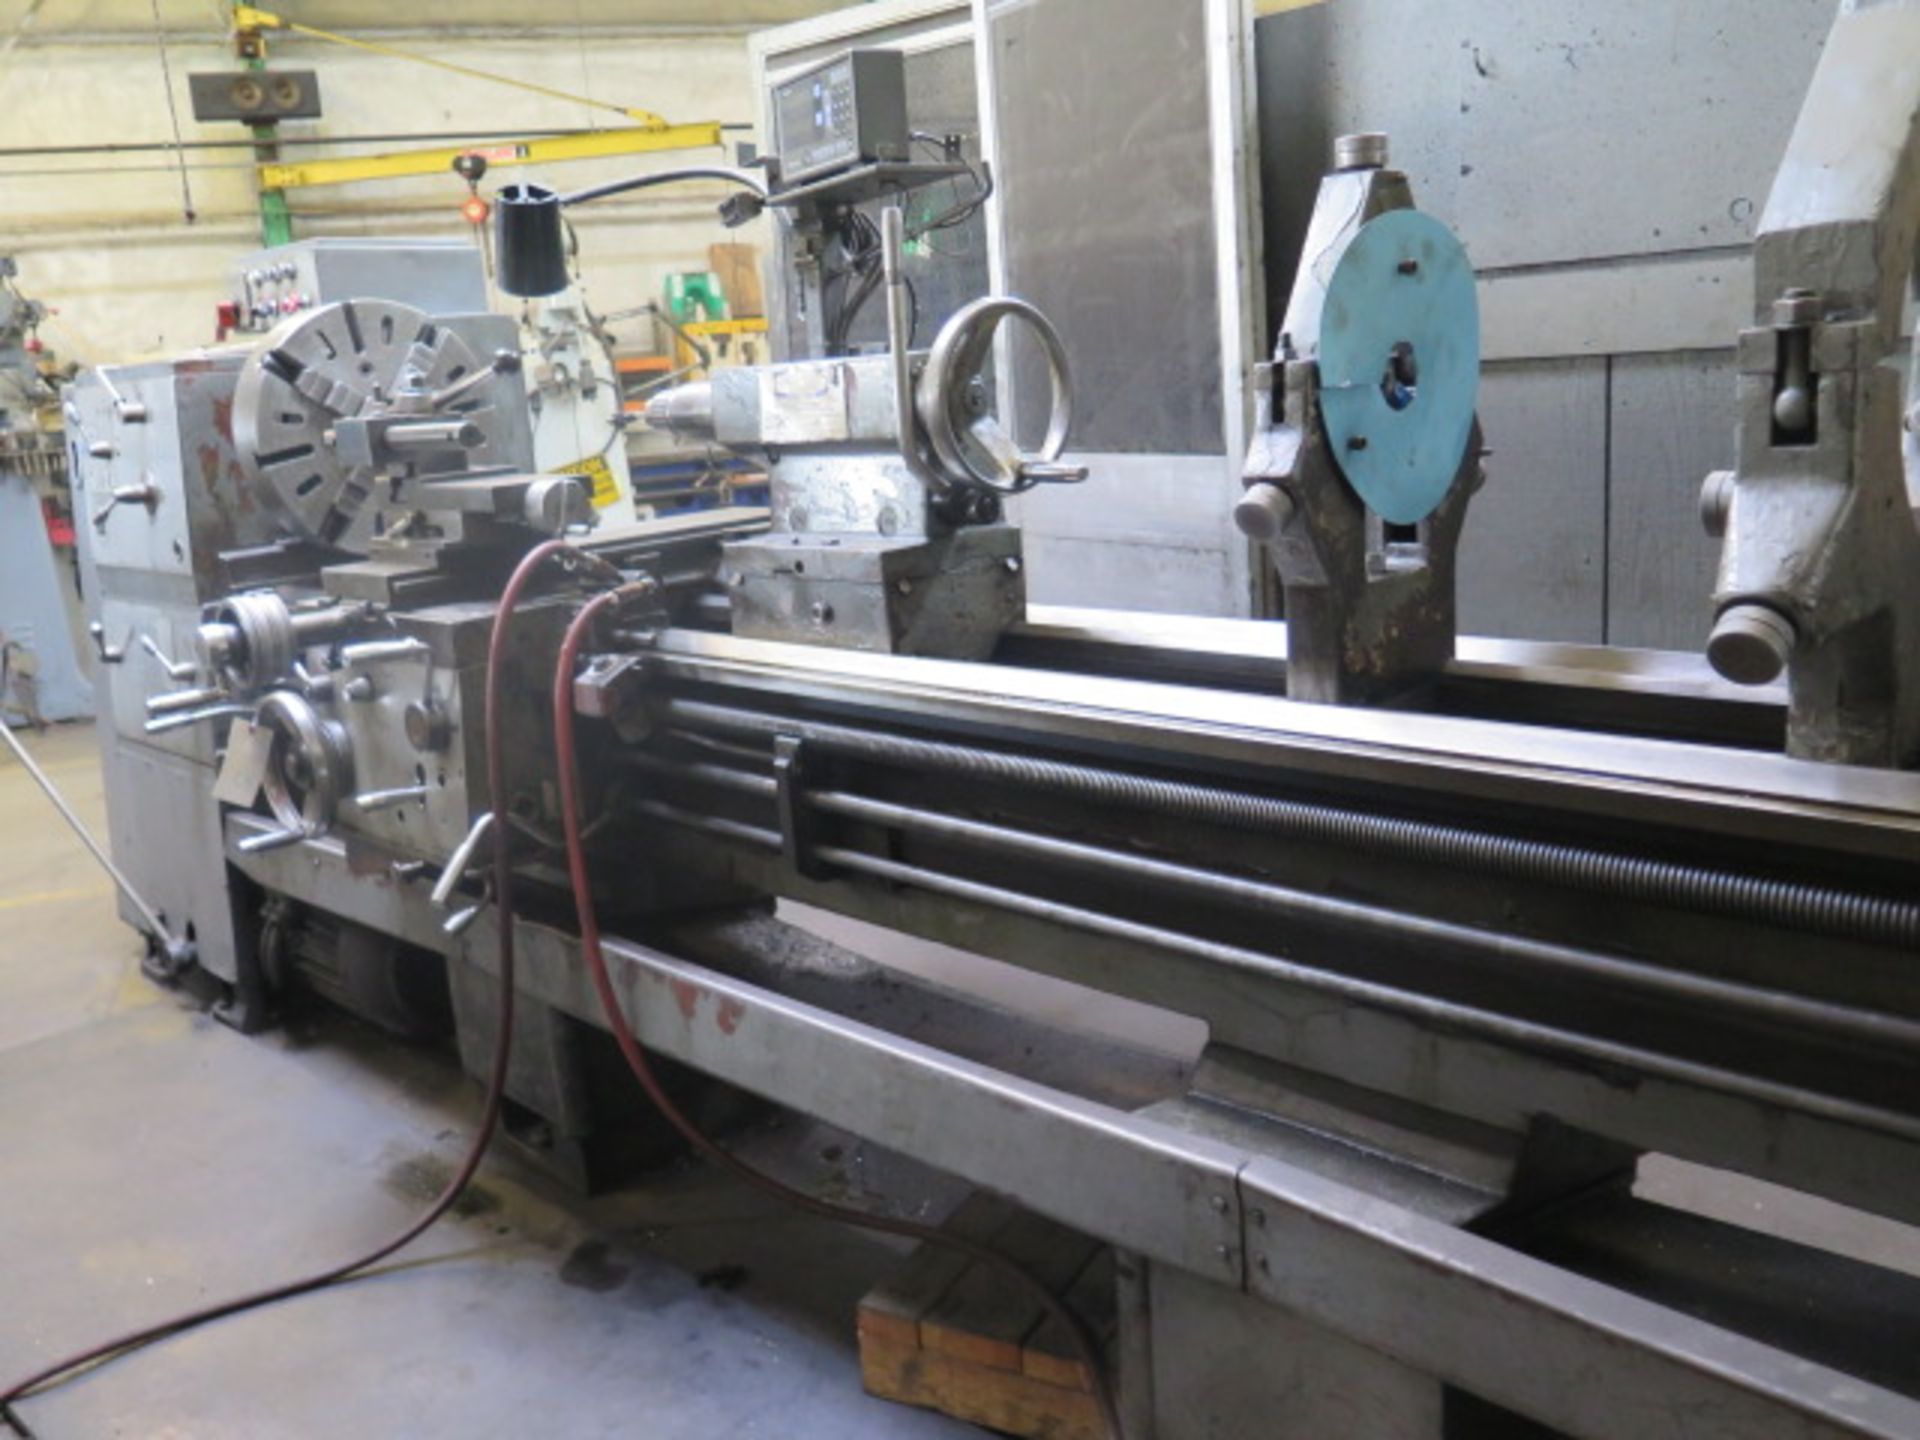 Polamco TUR-63 Big-Bore 25” x 120” Geared Head Gap Bed Lathe s/n 41189 w/ Mitutoyo DRO, SOLD AS IS - Image 3 of 14